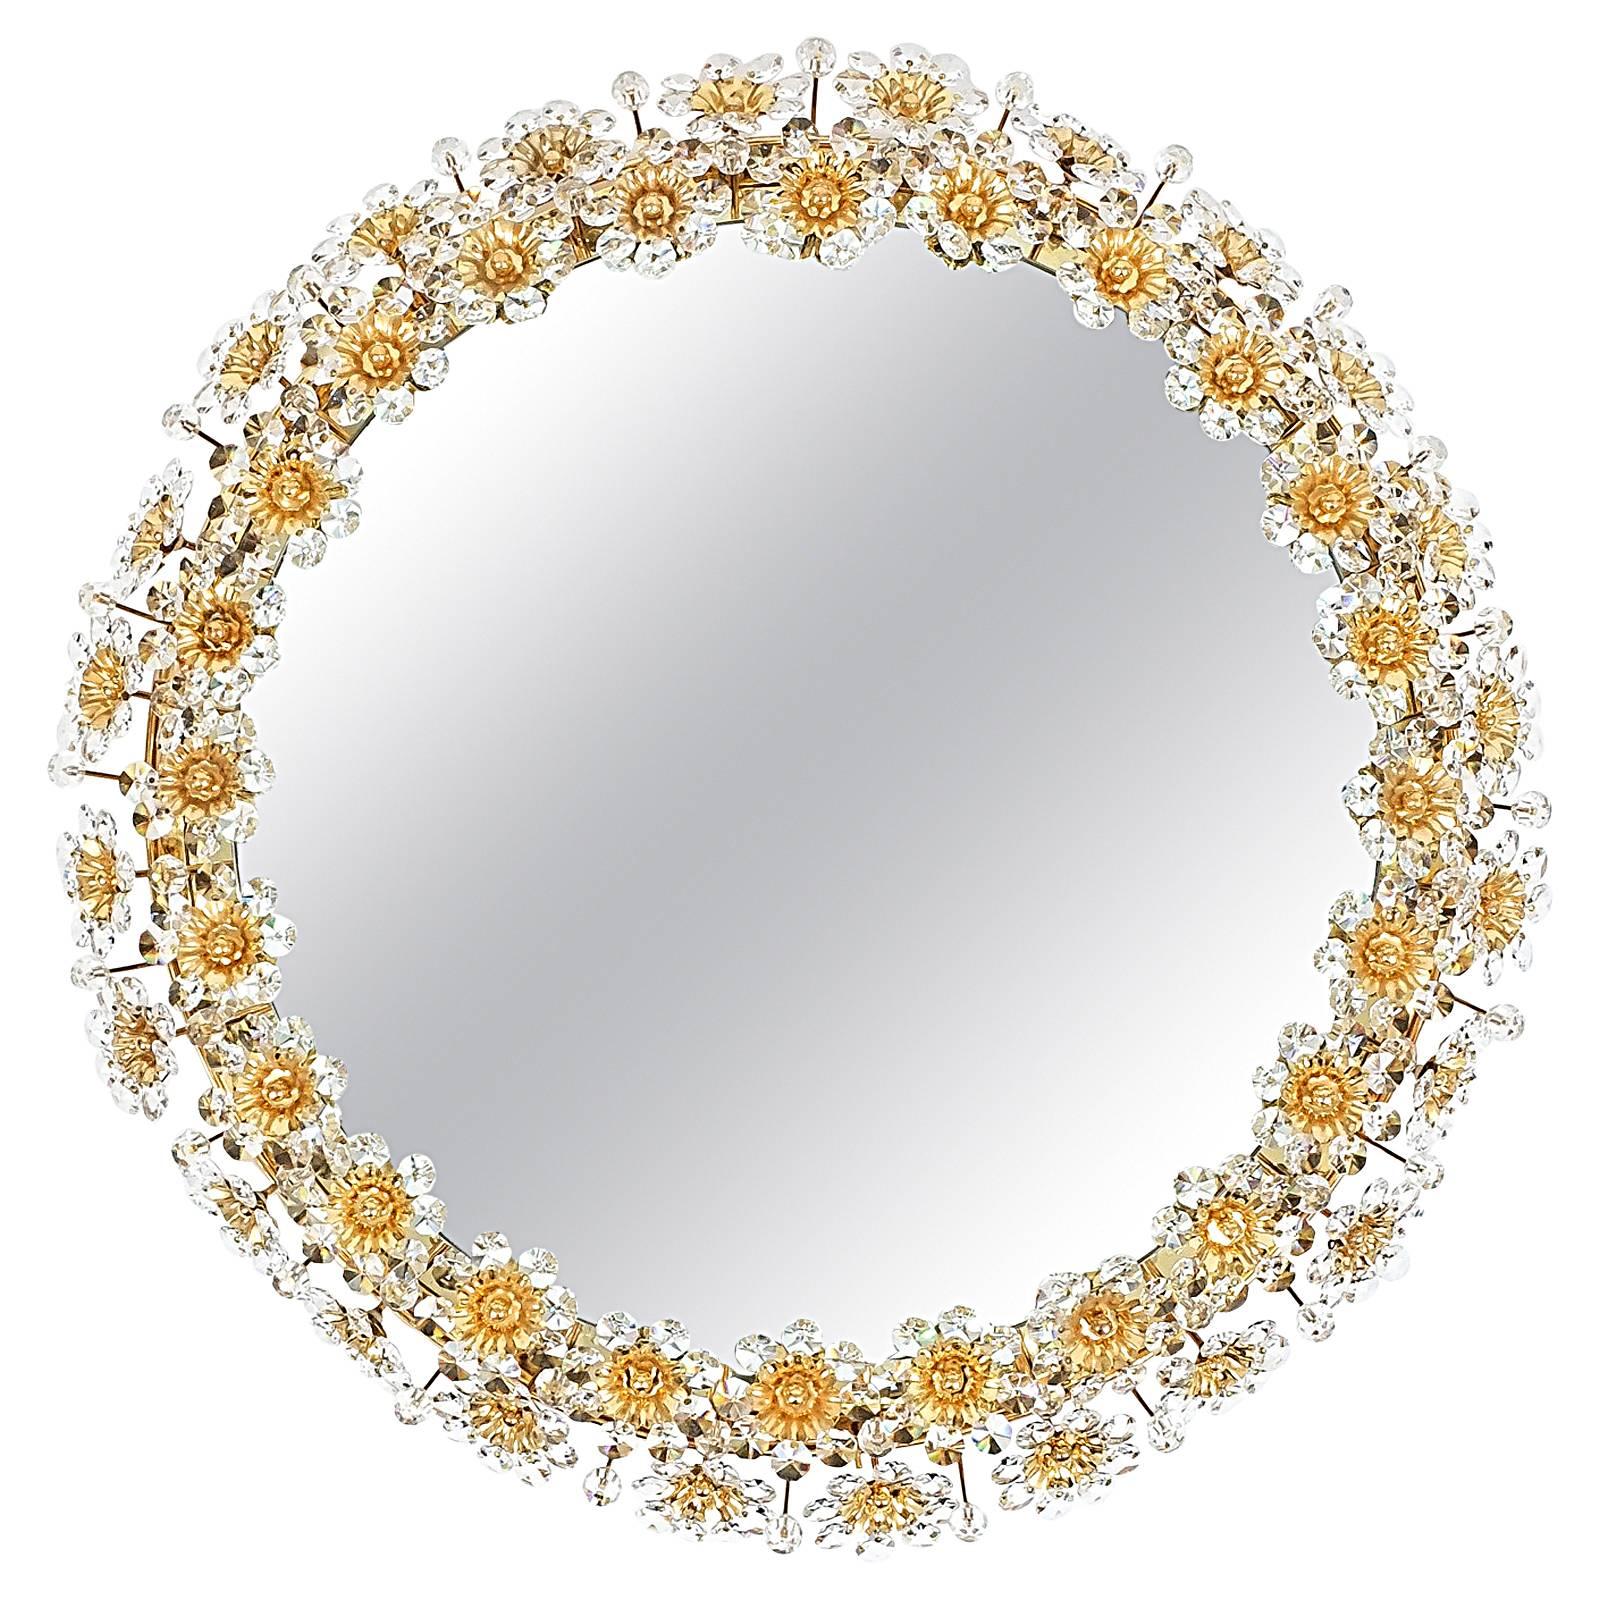 Amazing Illuminated Crystal Glass Mirror by Palwa with Gilded Frame